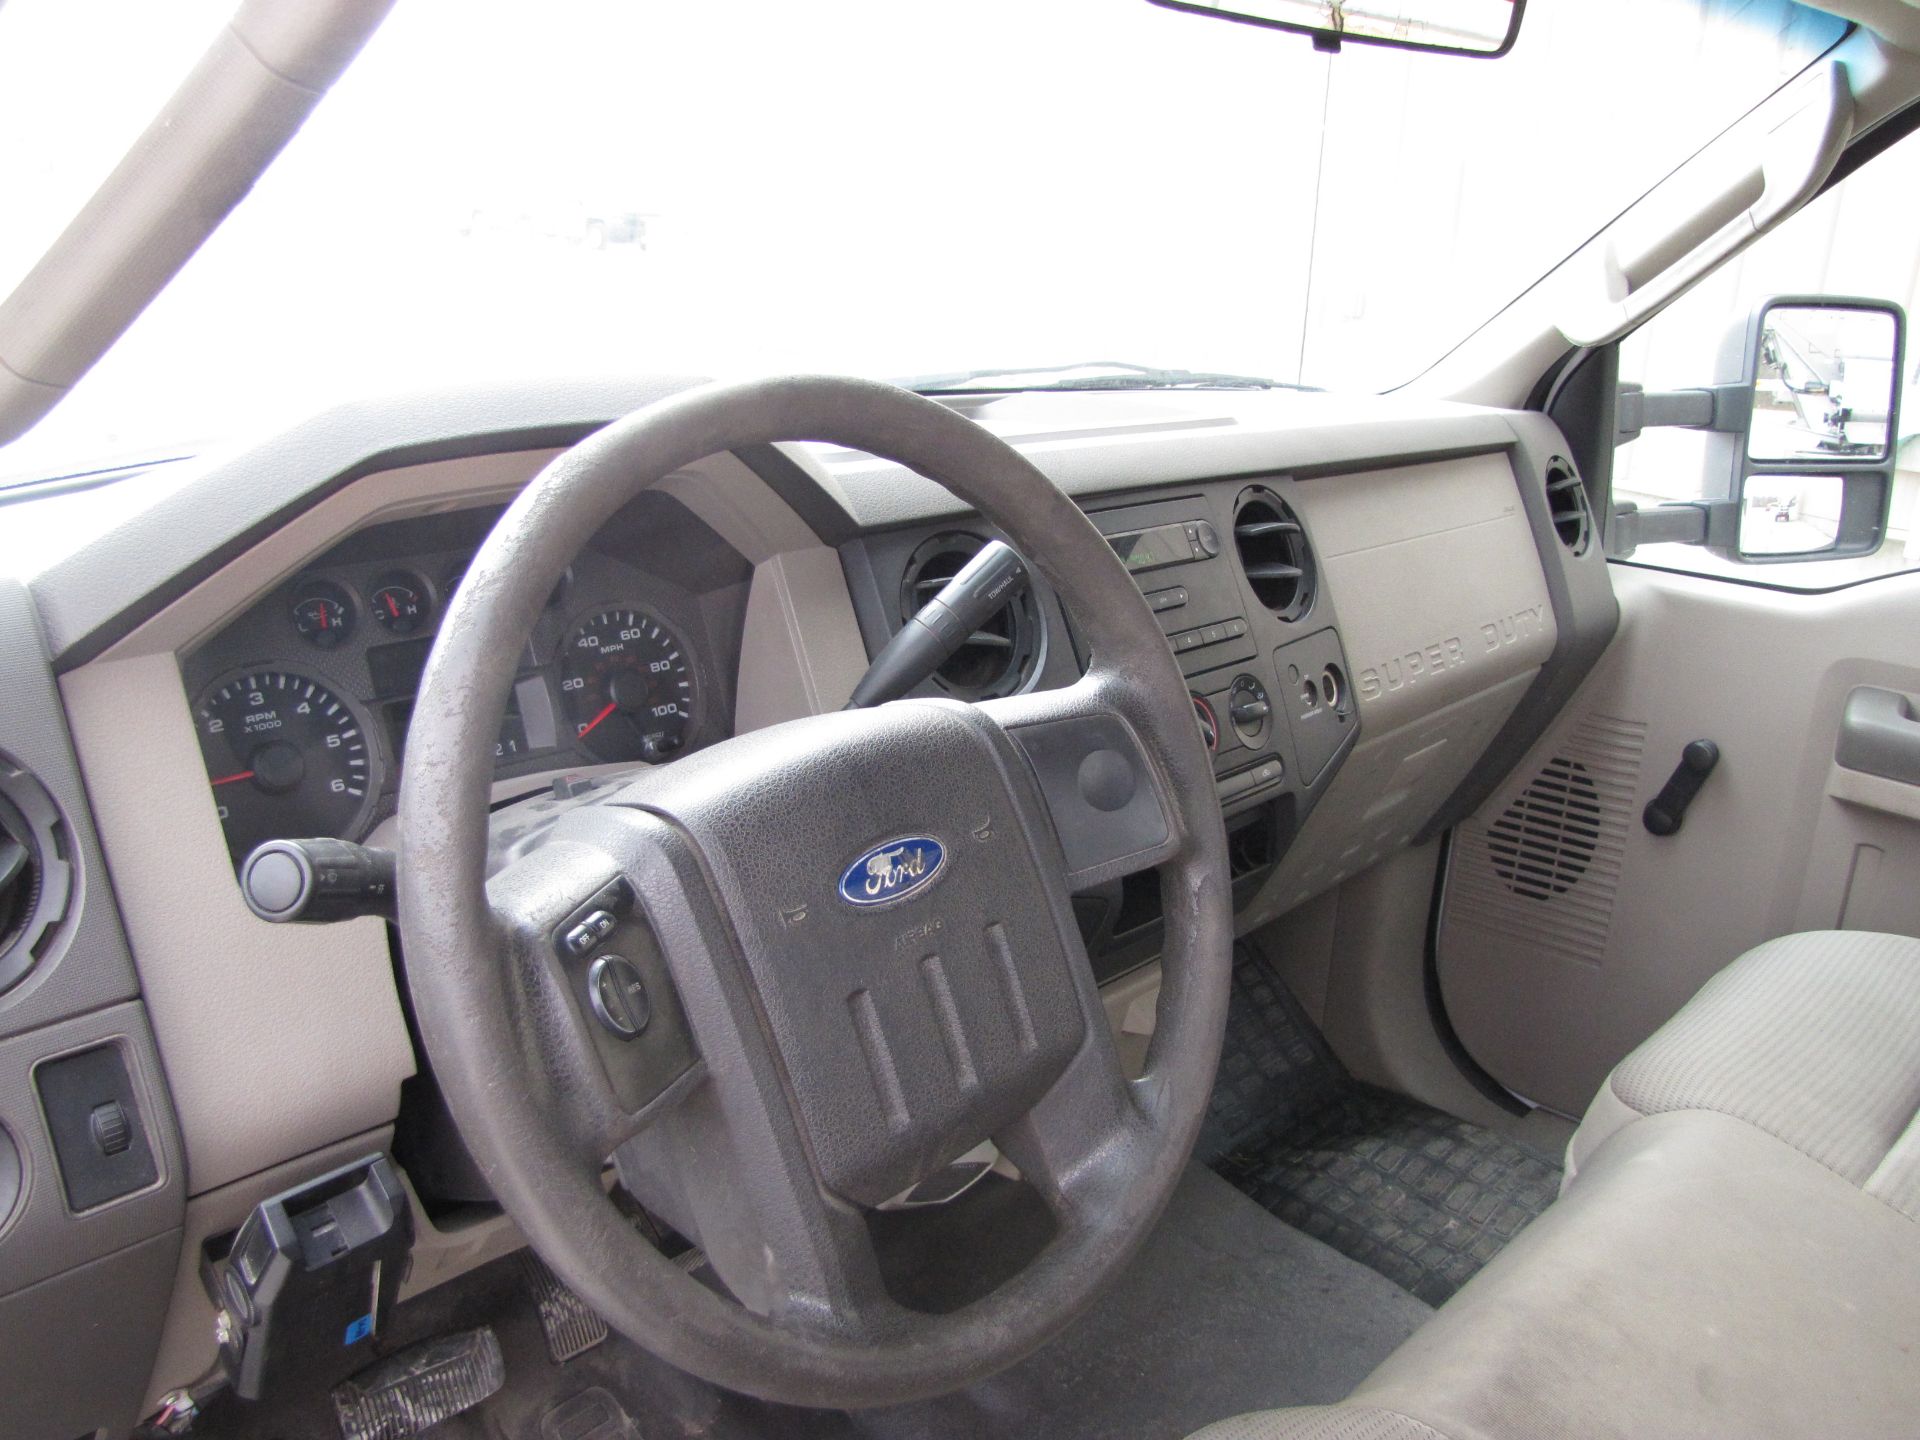 2009 Ford F350 XL Super Duty pickup truck - Image 44 of 55